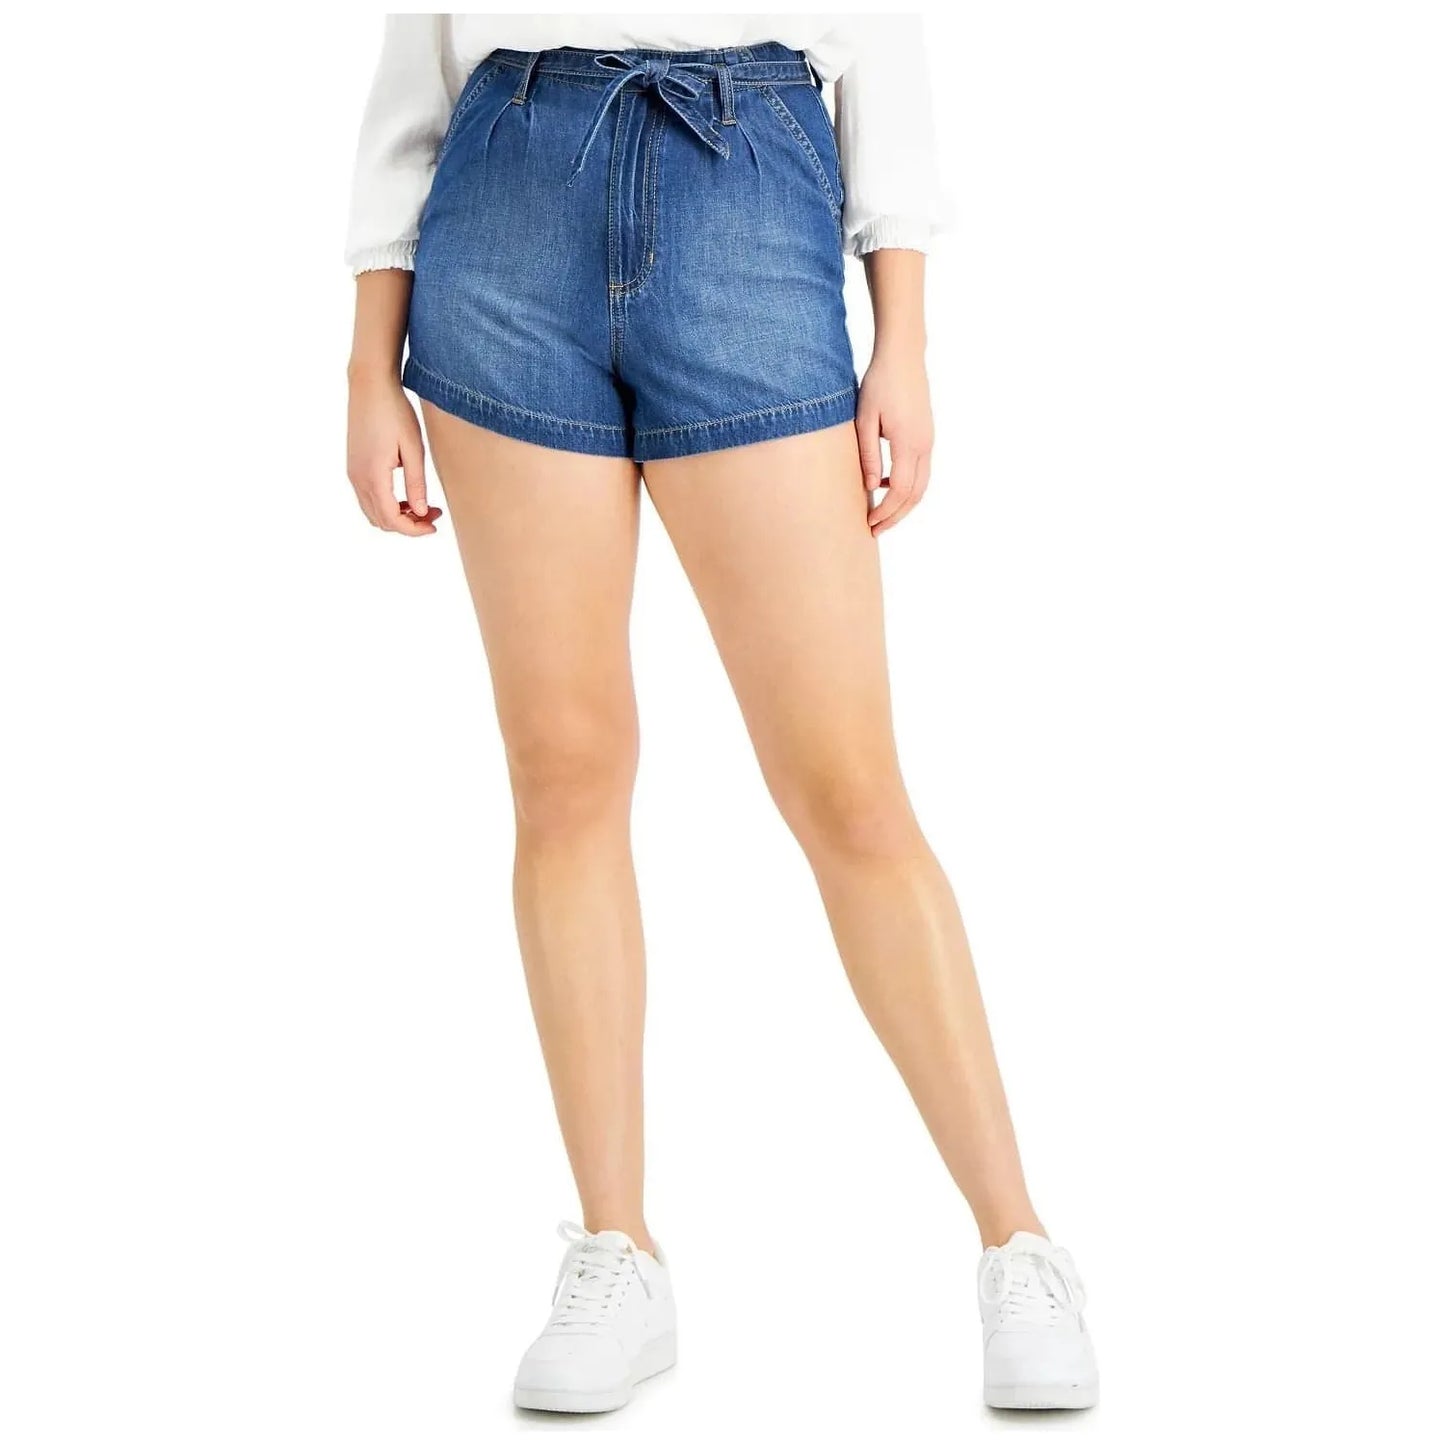 Celebrity Pink Juniors High-Rise Pleated Belted Jean Shorts, Blue, Size: 13 - Brandat Outlet